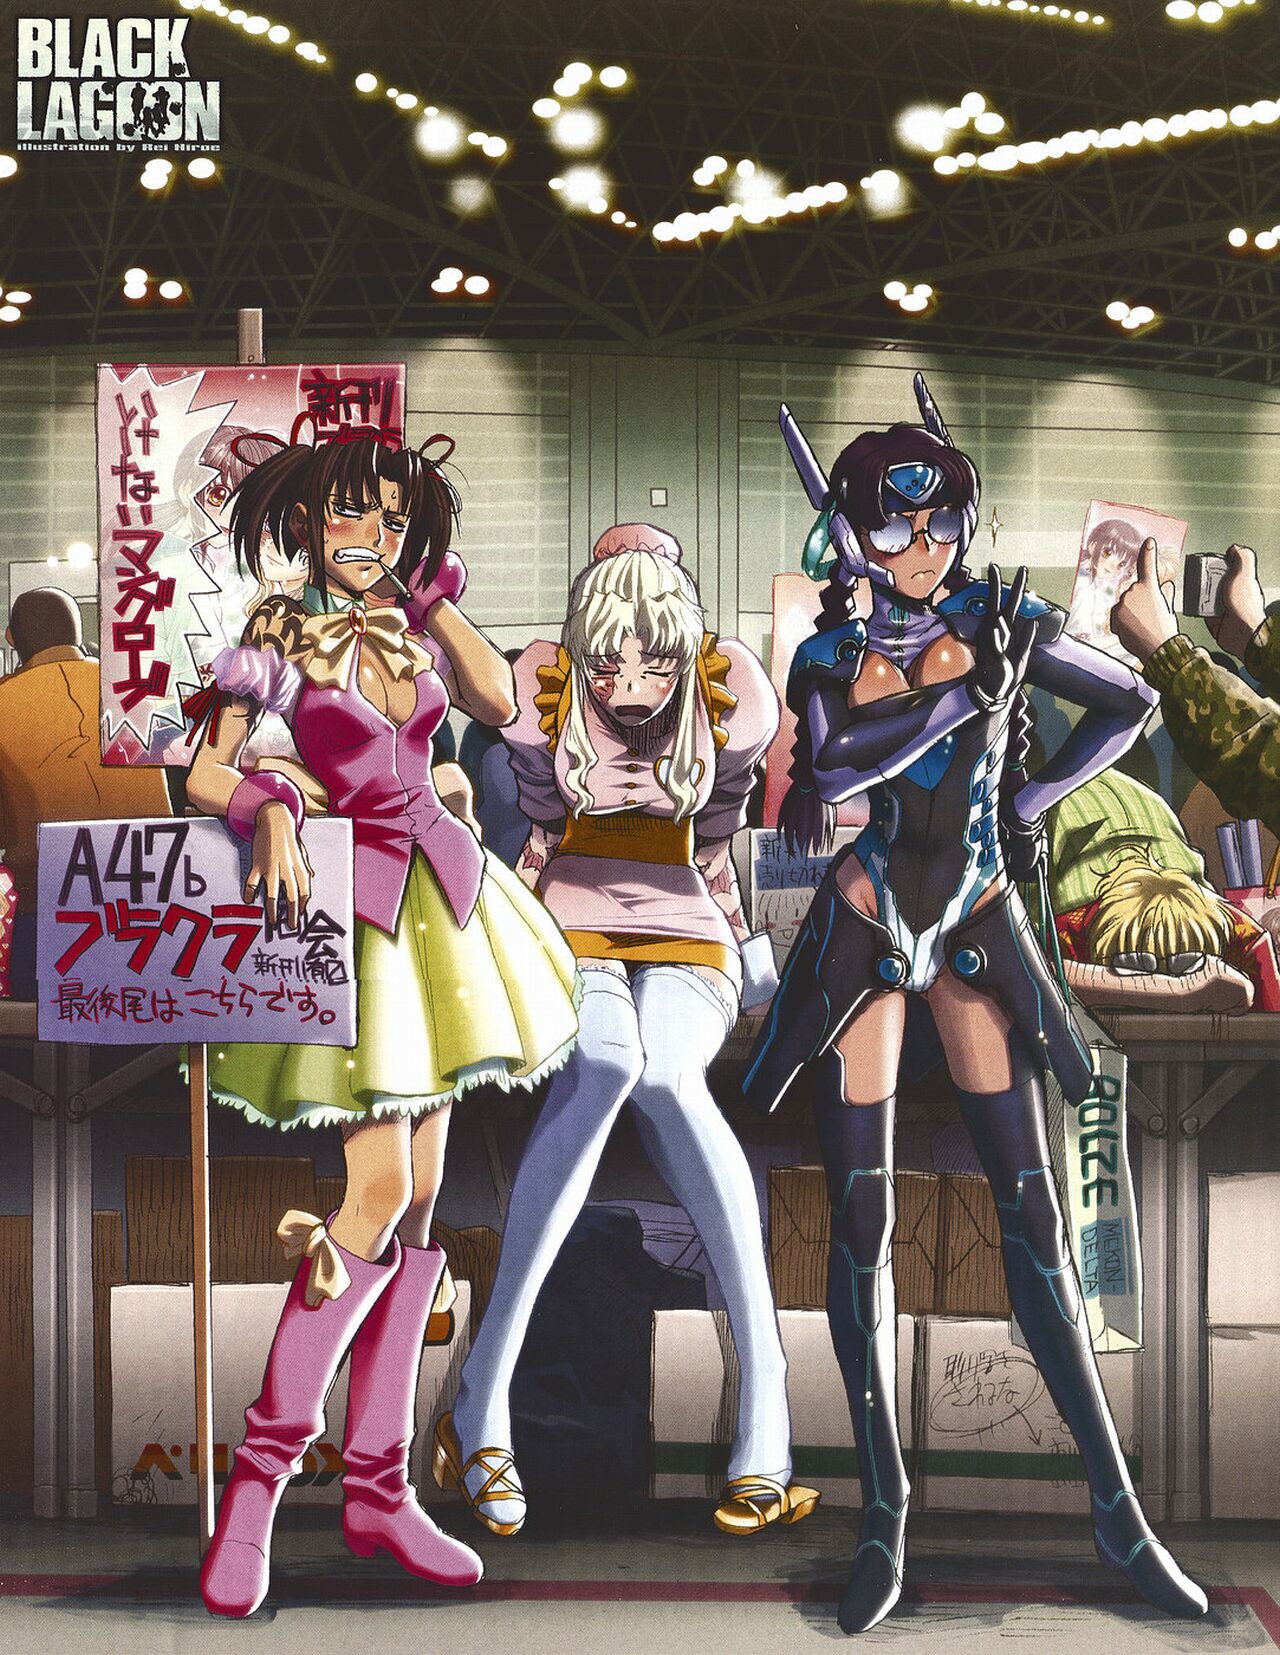 1boy 3girls alternate_hairstyle armor balalaika bangle bare_shoulders benny black_lagoon black_legwear blush boots bracelet braid breasts bun_cover cigarette cleavage cleavage_cutout comiket cosplay embarrassed faulds glasses hair_bun hand_on_hip highres hiroe_rei jewelry knee_boots large_breasts leotard magical_girl miniskirt multiple_girls opaque_glasses parody pauldrons pose poster_(object) revy roberta robot_ears round_glasses scar skirt sleeping smoking tattoo thigh-highs thigh_boots thighhighs translation_request twin_braids twintails v white_legwear wrist_cuffs zettai_ryouiki